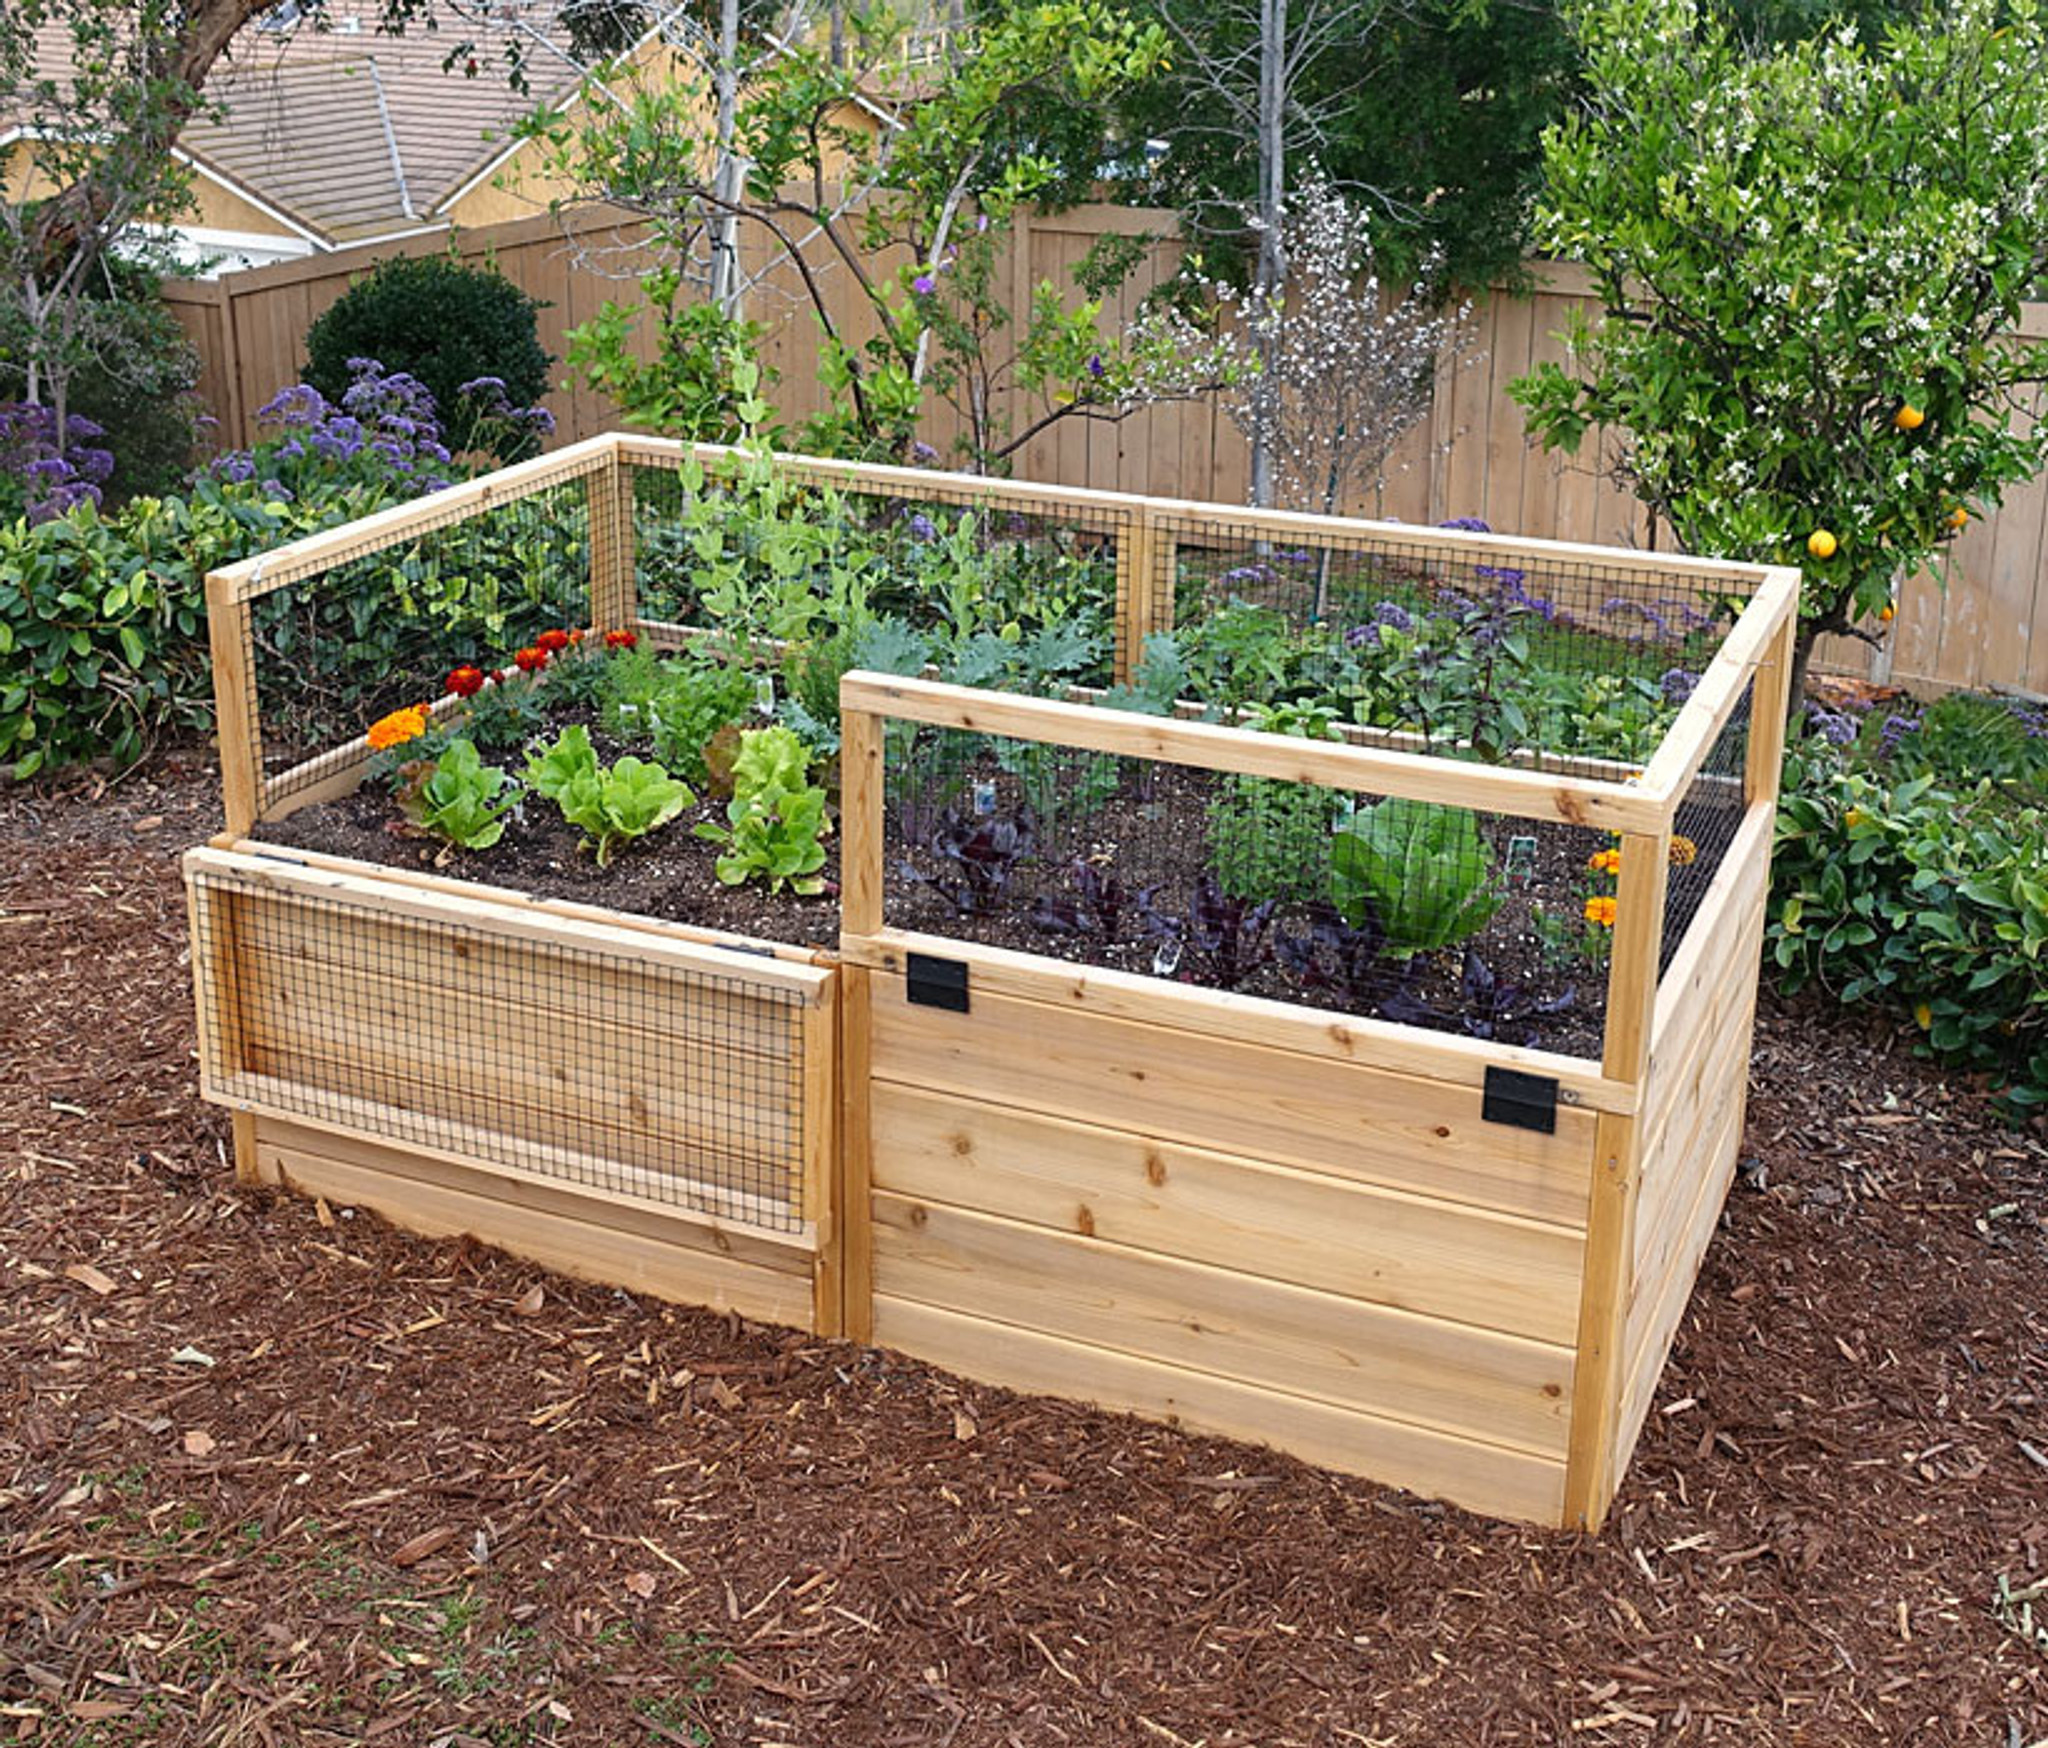 3' x 6' Raised Garden Bed With Hinged Fencing | Eartheasy.com